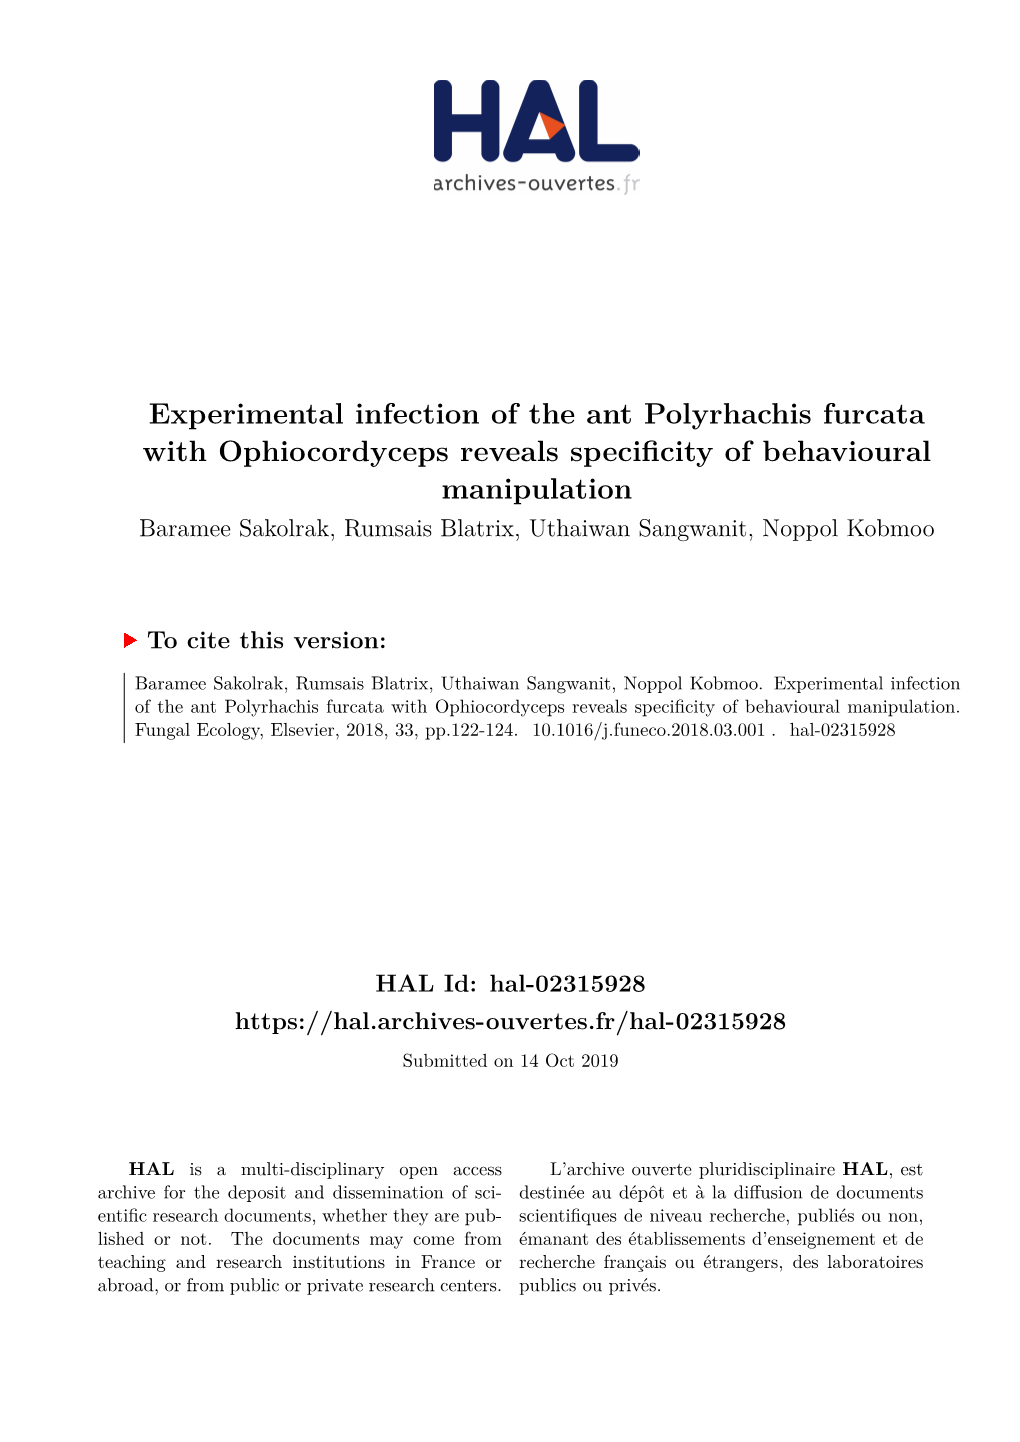 Experimental Infection of the Ant Polyrhachis Furcata with Ophiocordyceps Reveals Specificity of Behavioural Manipulation